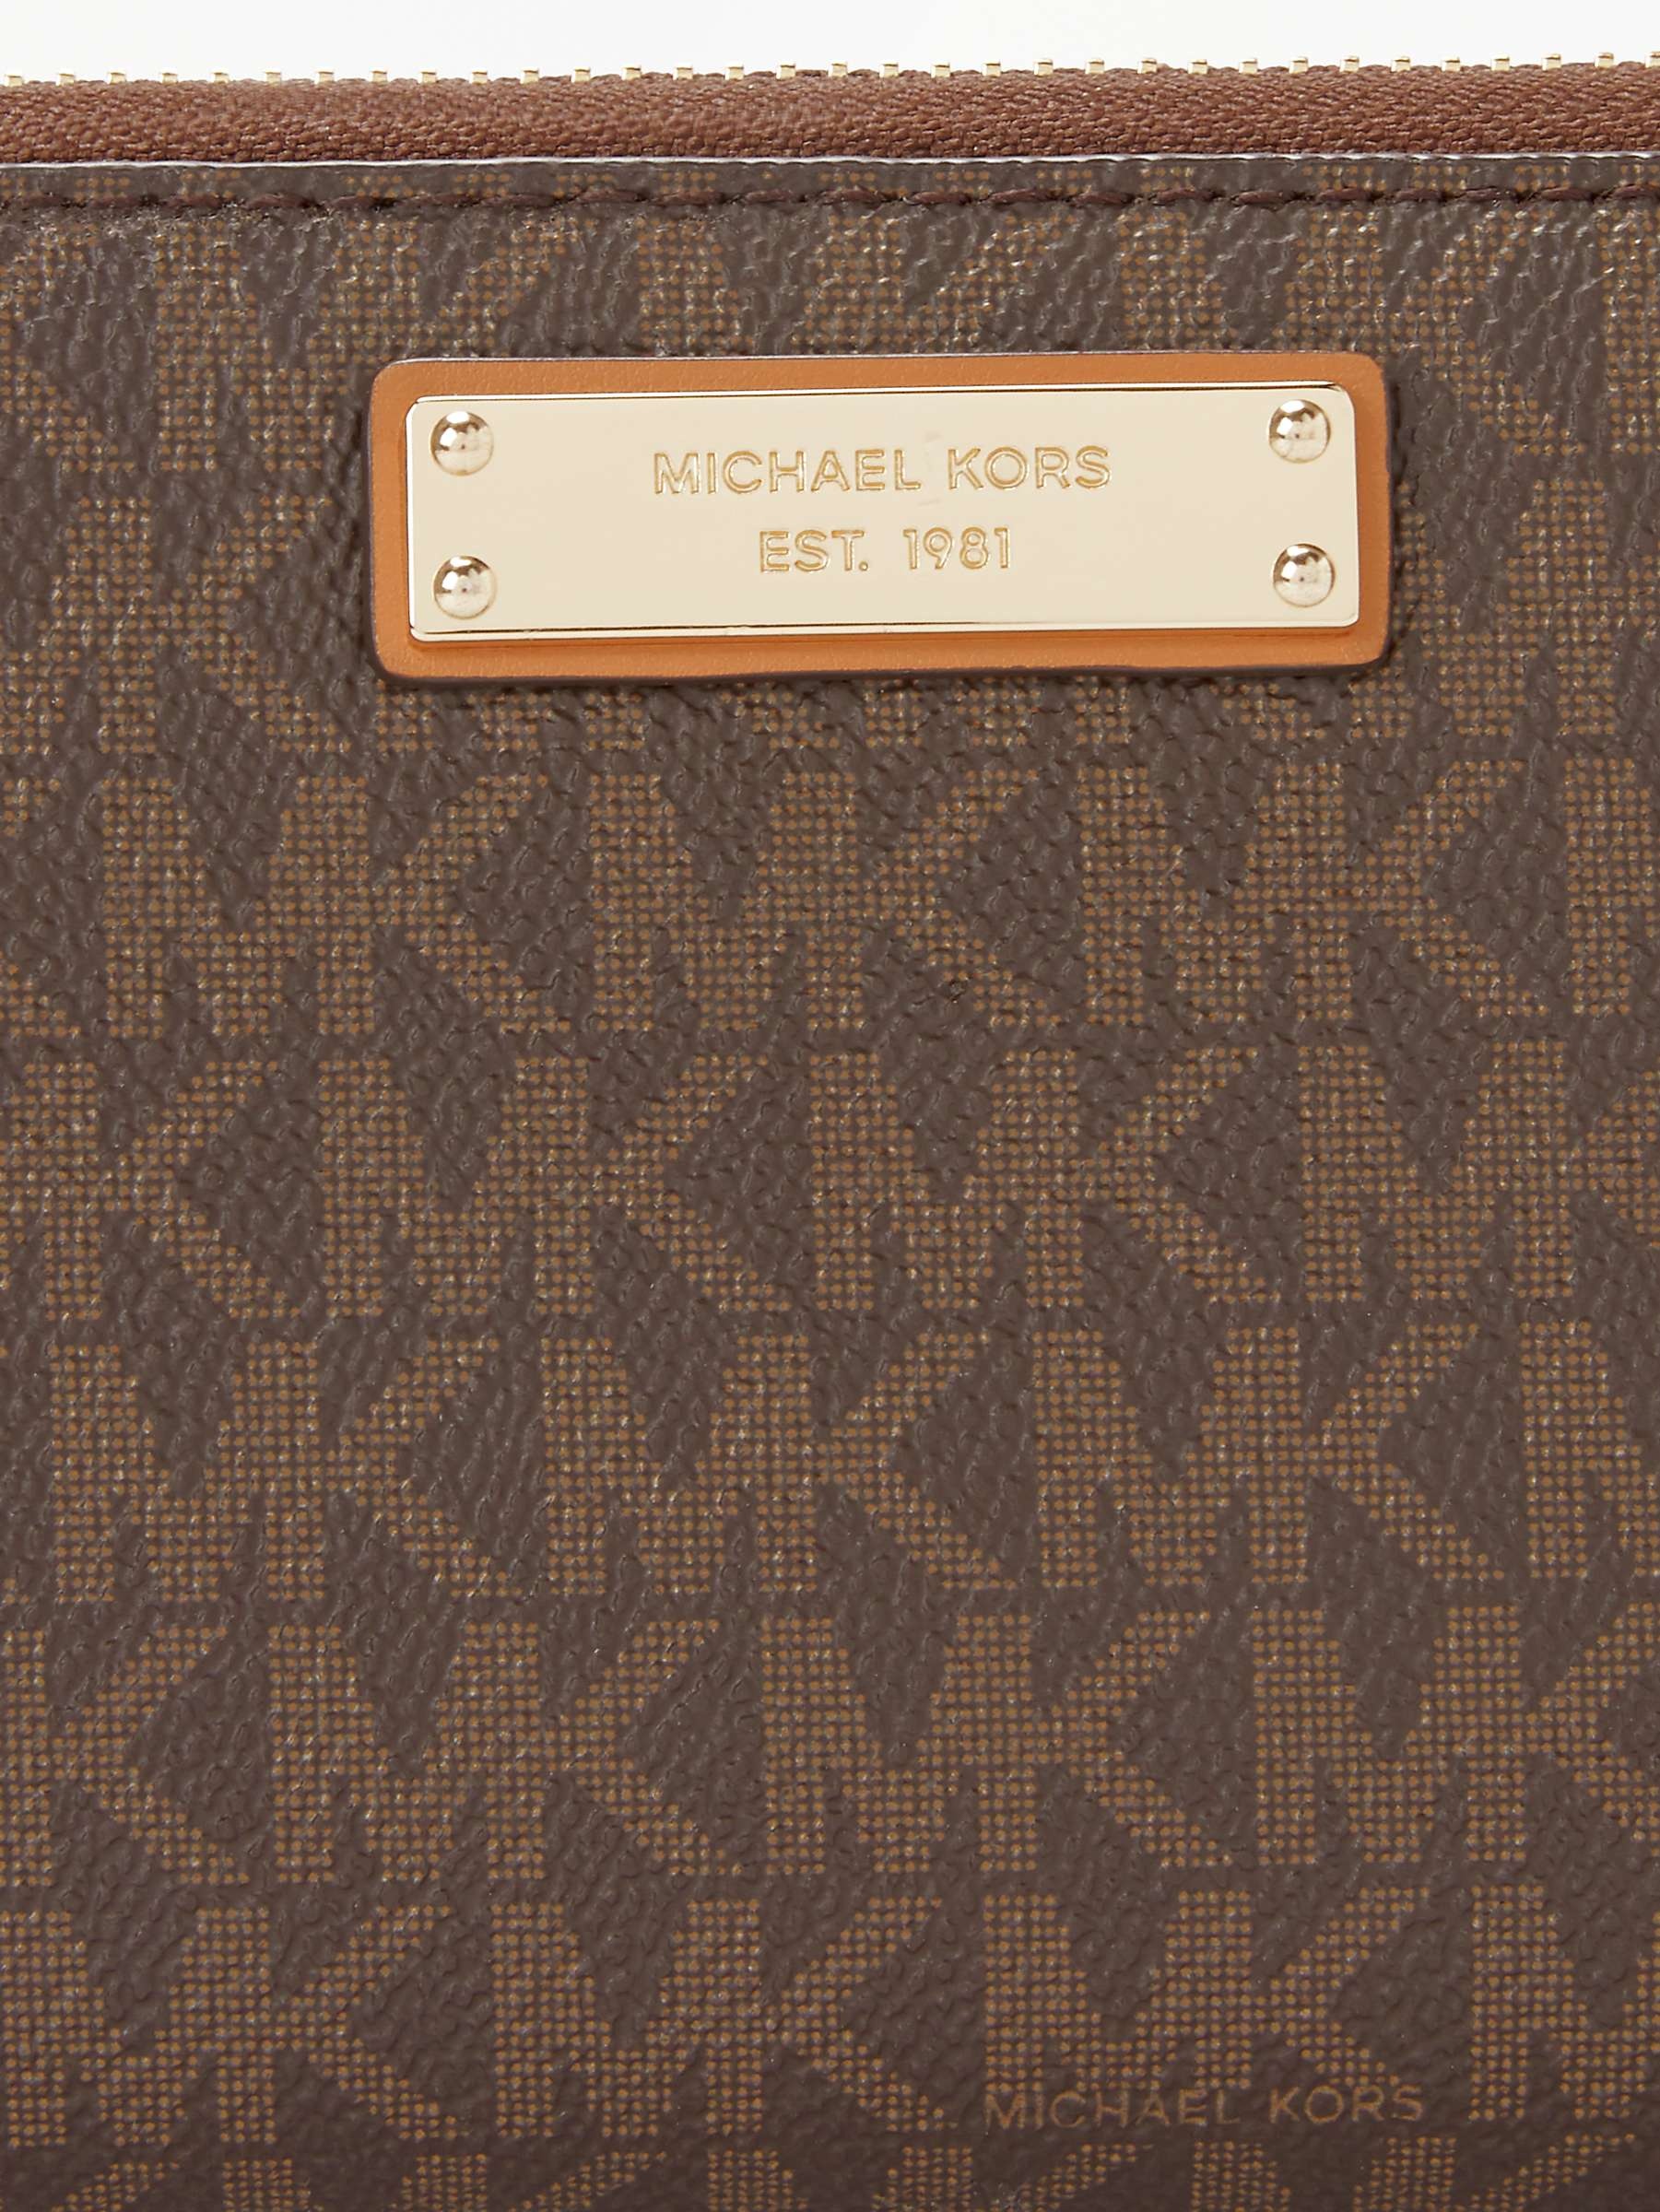 Michael Kors, Stunning iPhone wallpapers, Style and elegance, Posted by fans, 1810x2400 HD Phone